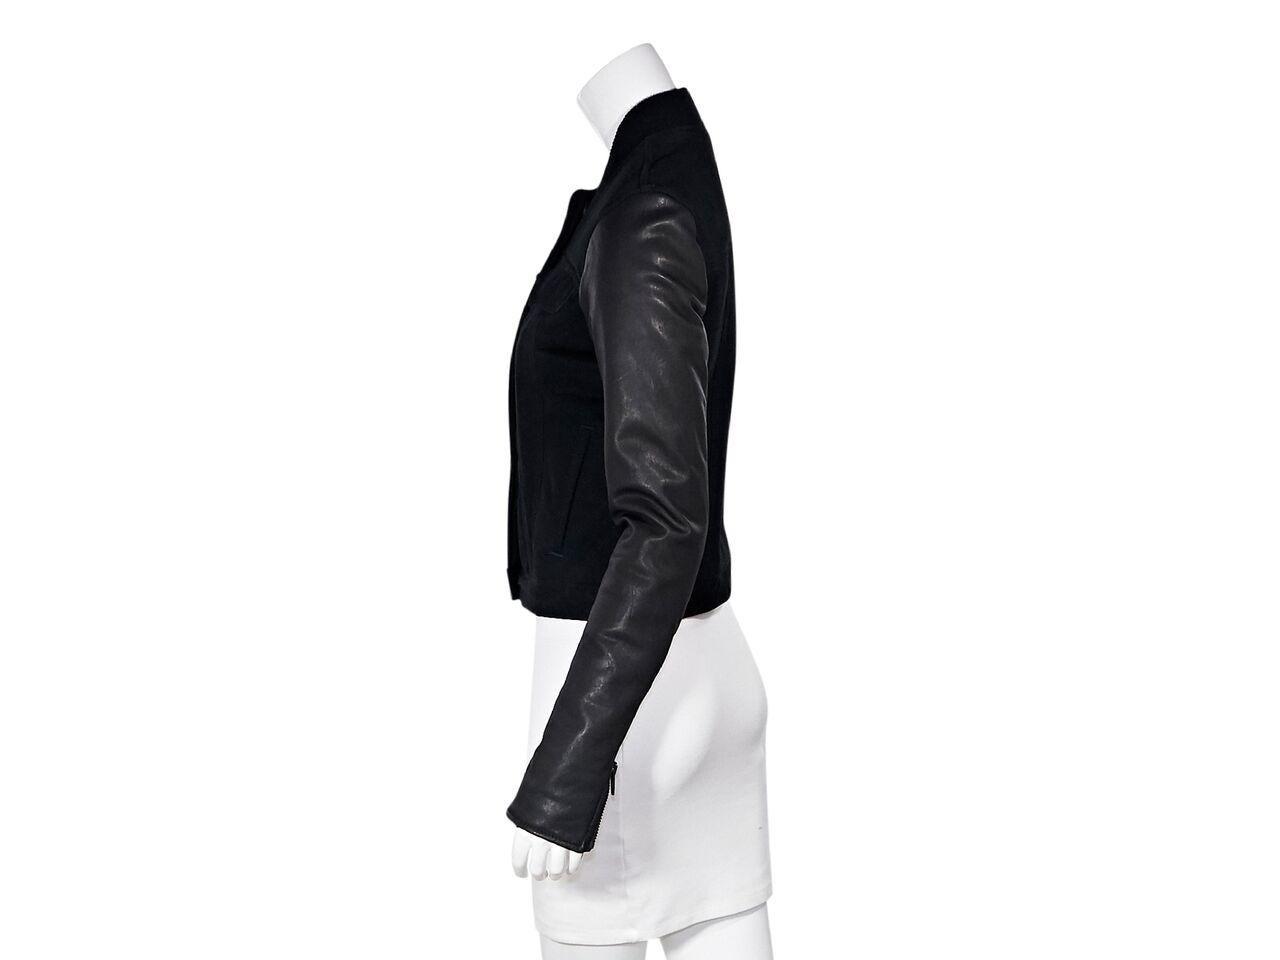 Product details:  Black stretch cotton denim jacket by Alexander Wang.  Ribbed stand collar.  Long leather sleeves.  Zip cuffs.  Concealed button-front closure.  Chest flap pockets.  Waist slide pockets.  32